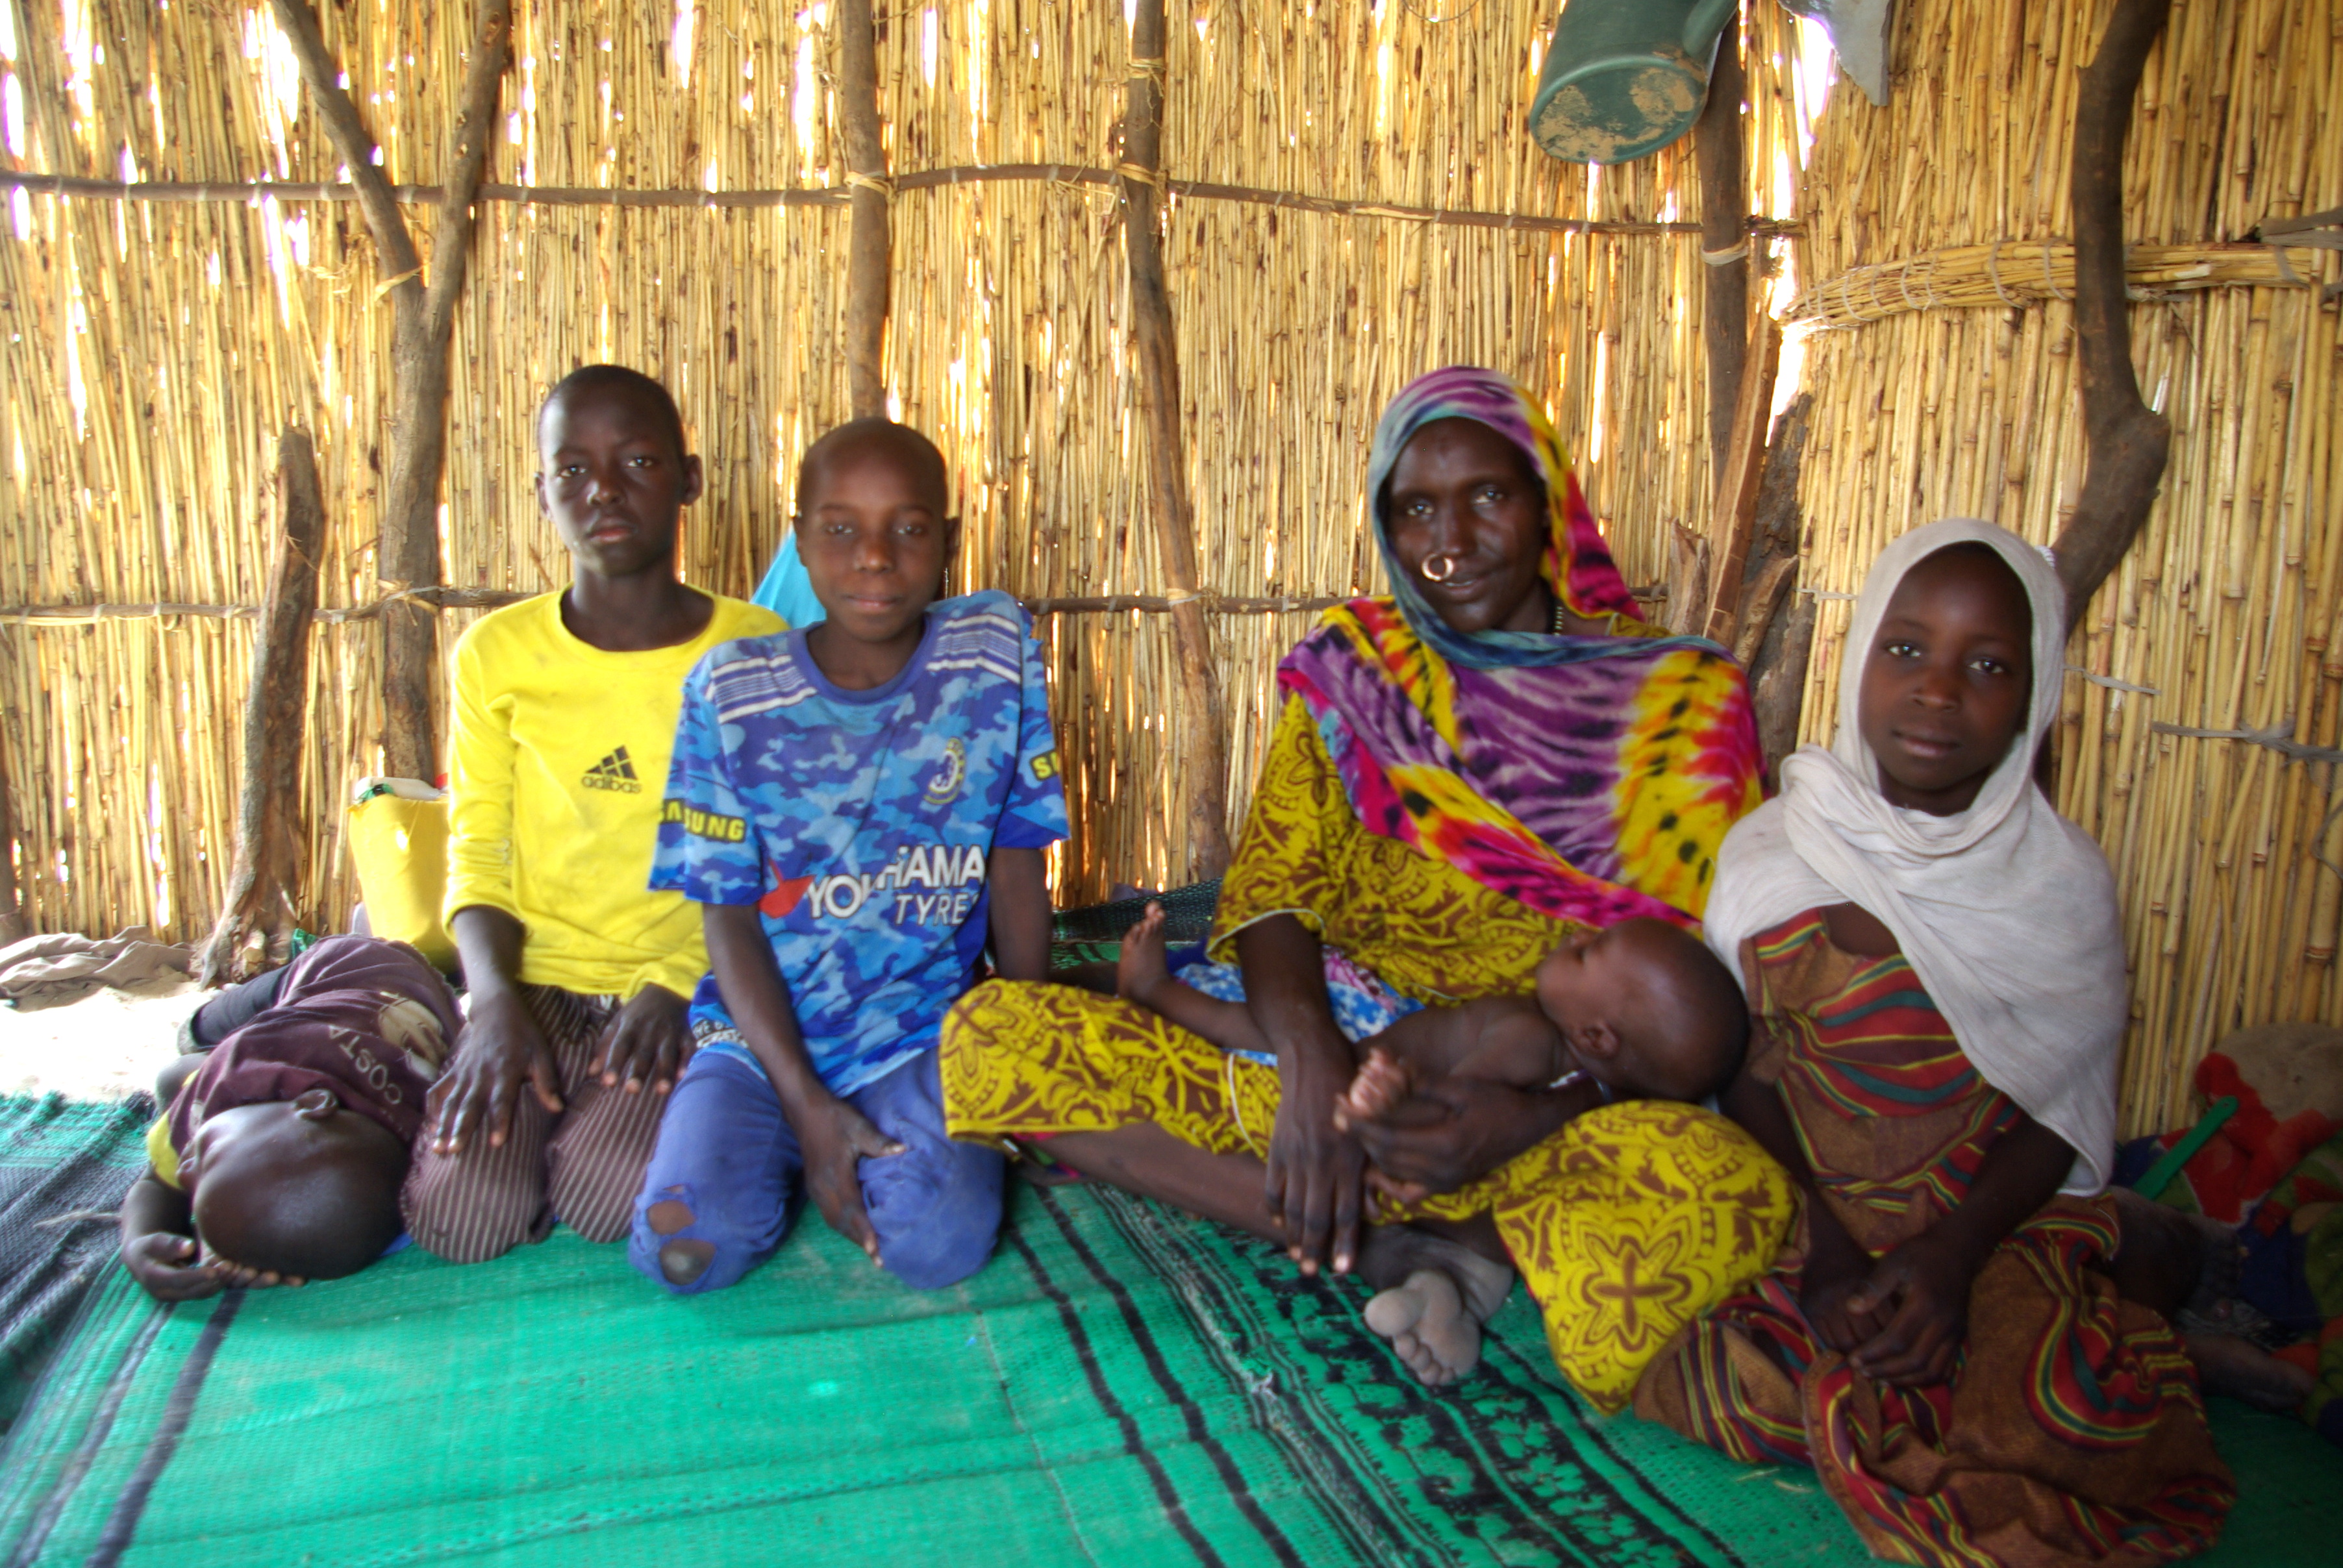 A mother and her children in an IDP camp in the Lac region of Chad.